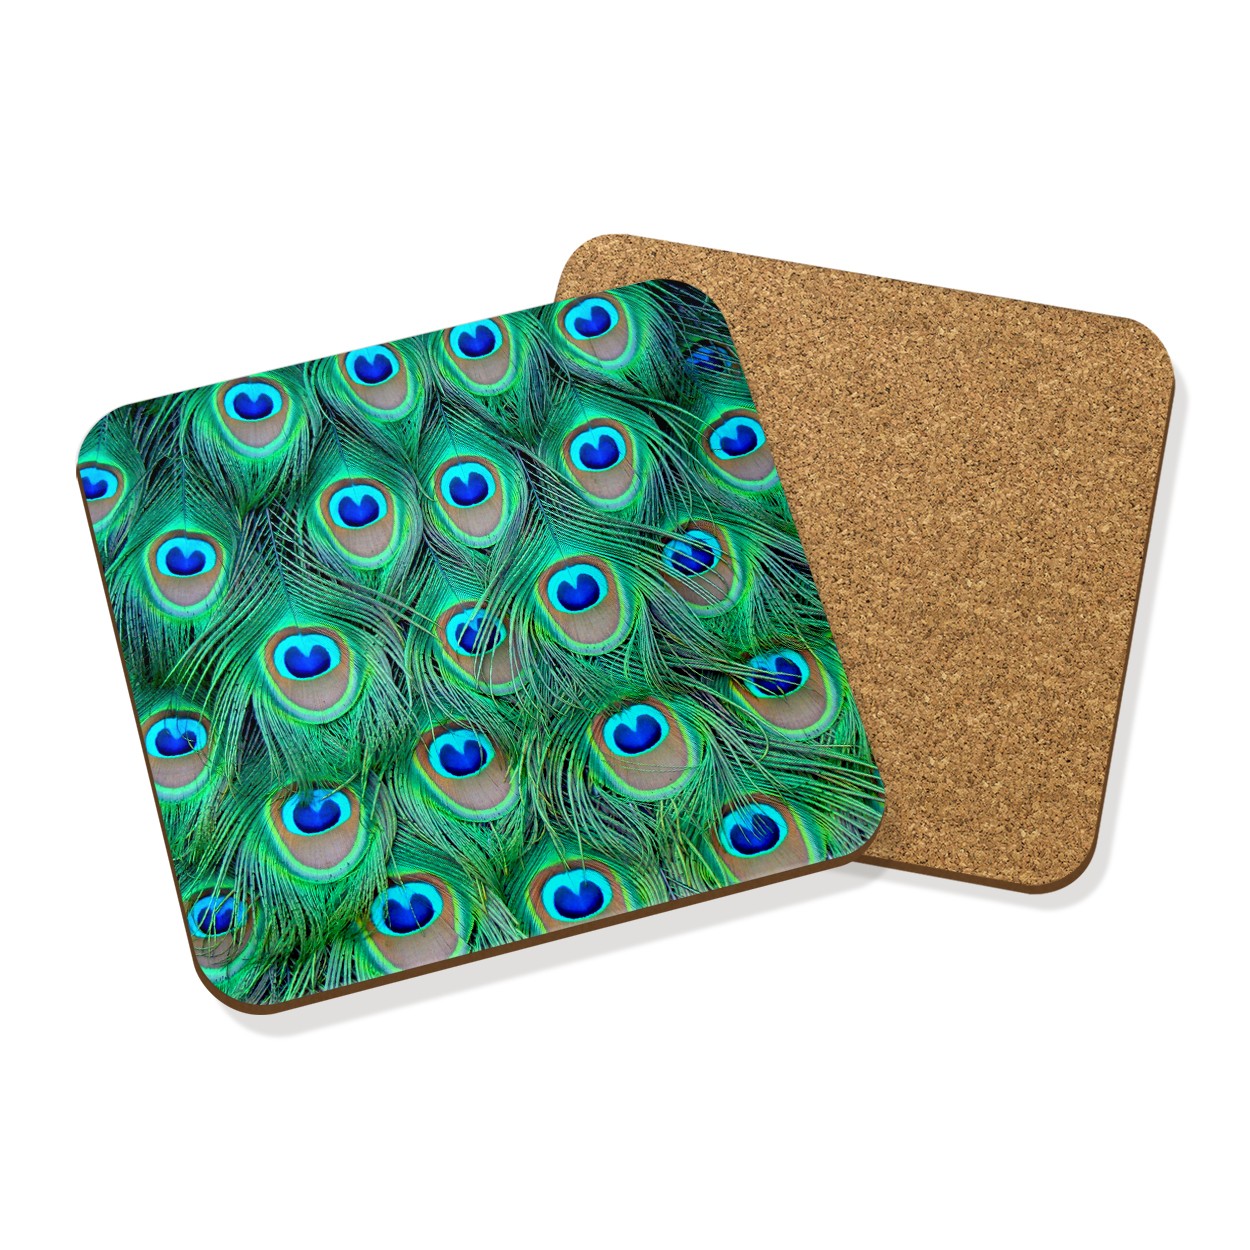 PEACOCK FEATHERS PATTERN DRINKS COASTER MAT CORK SQUARE SET X4